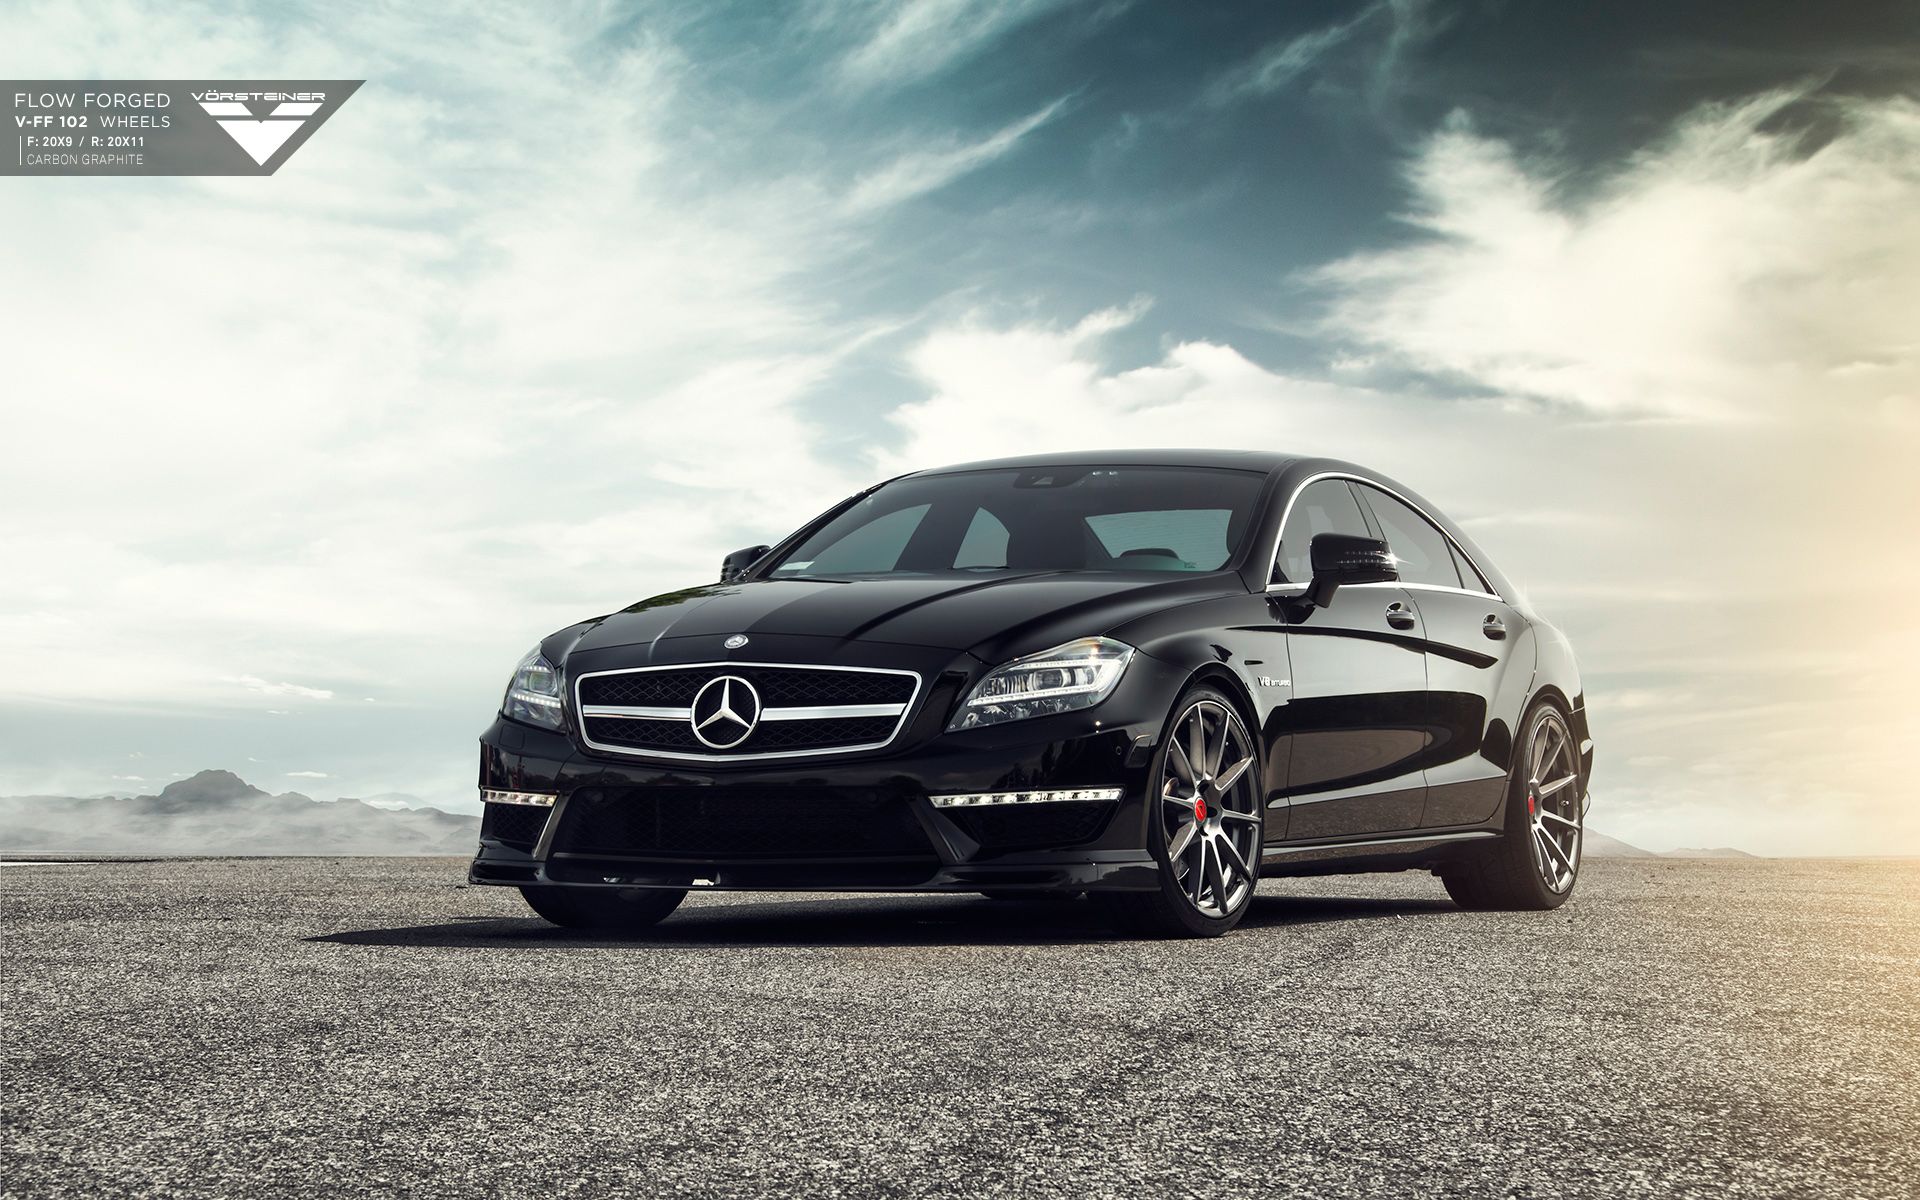 mercedes-amg-logo-wallpaper-cls-class-luxury-coupe-cls550-cls63-amg-mercedes-benz-image  - Get The Edge